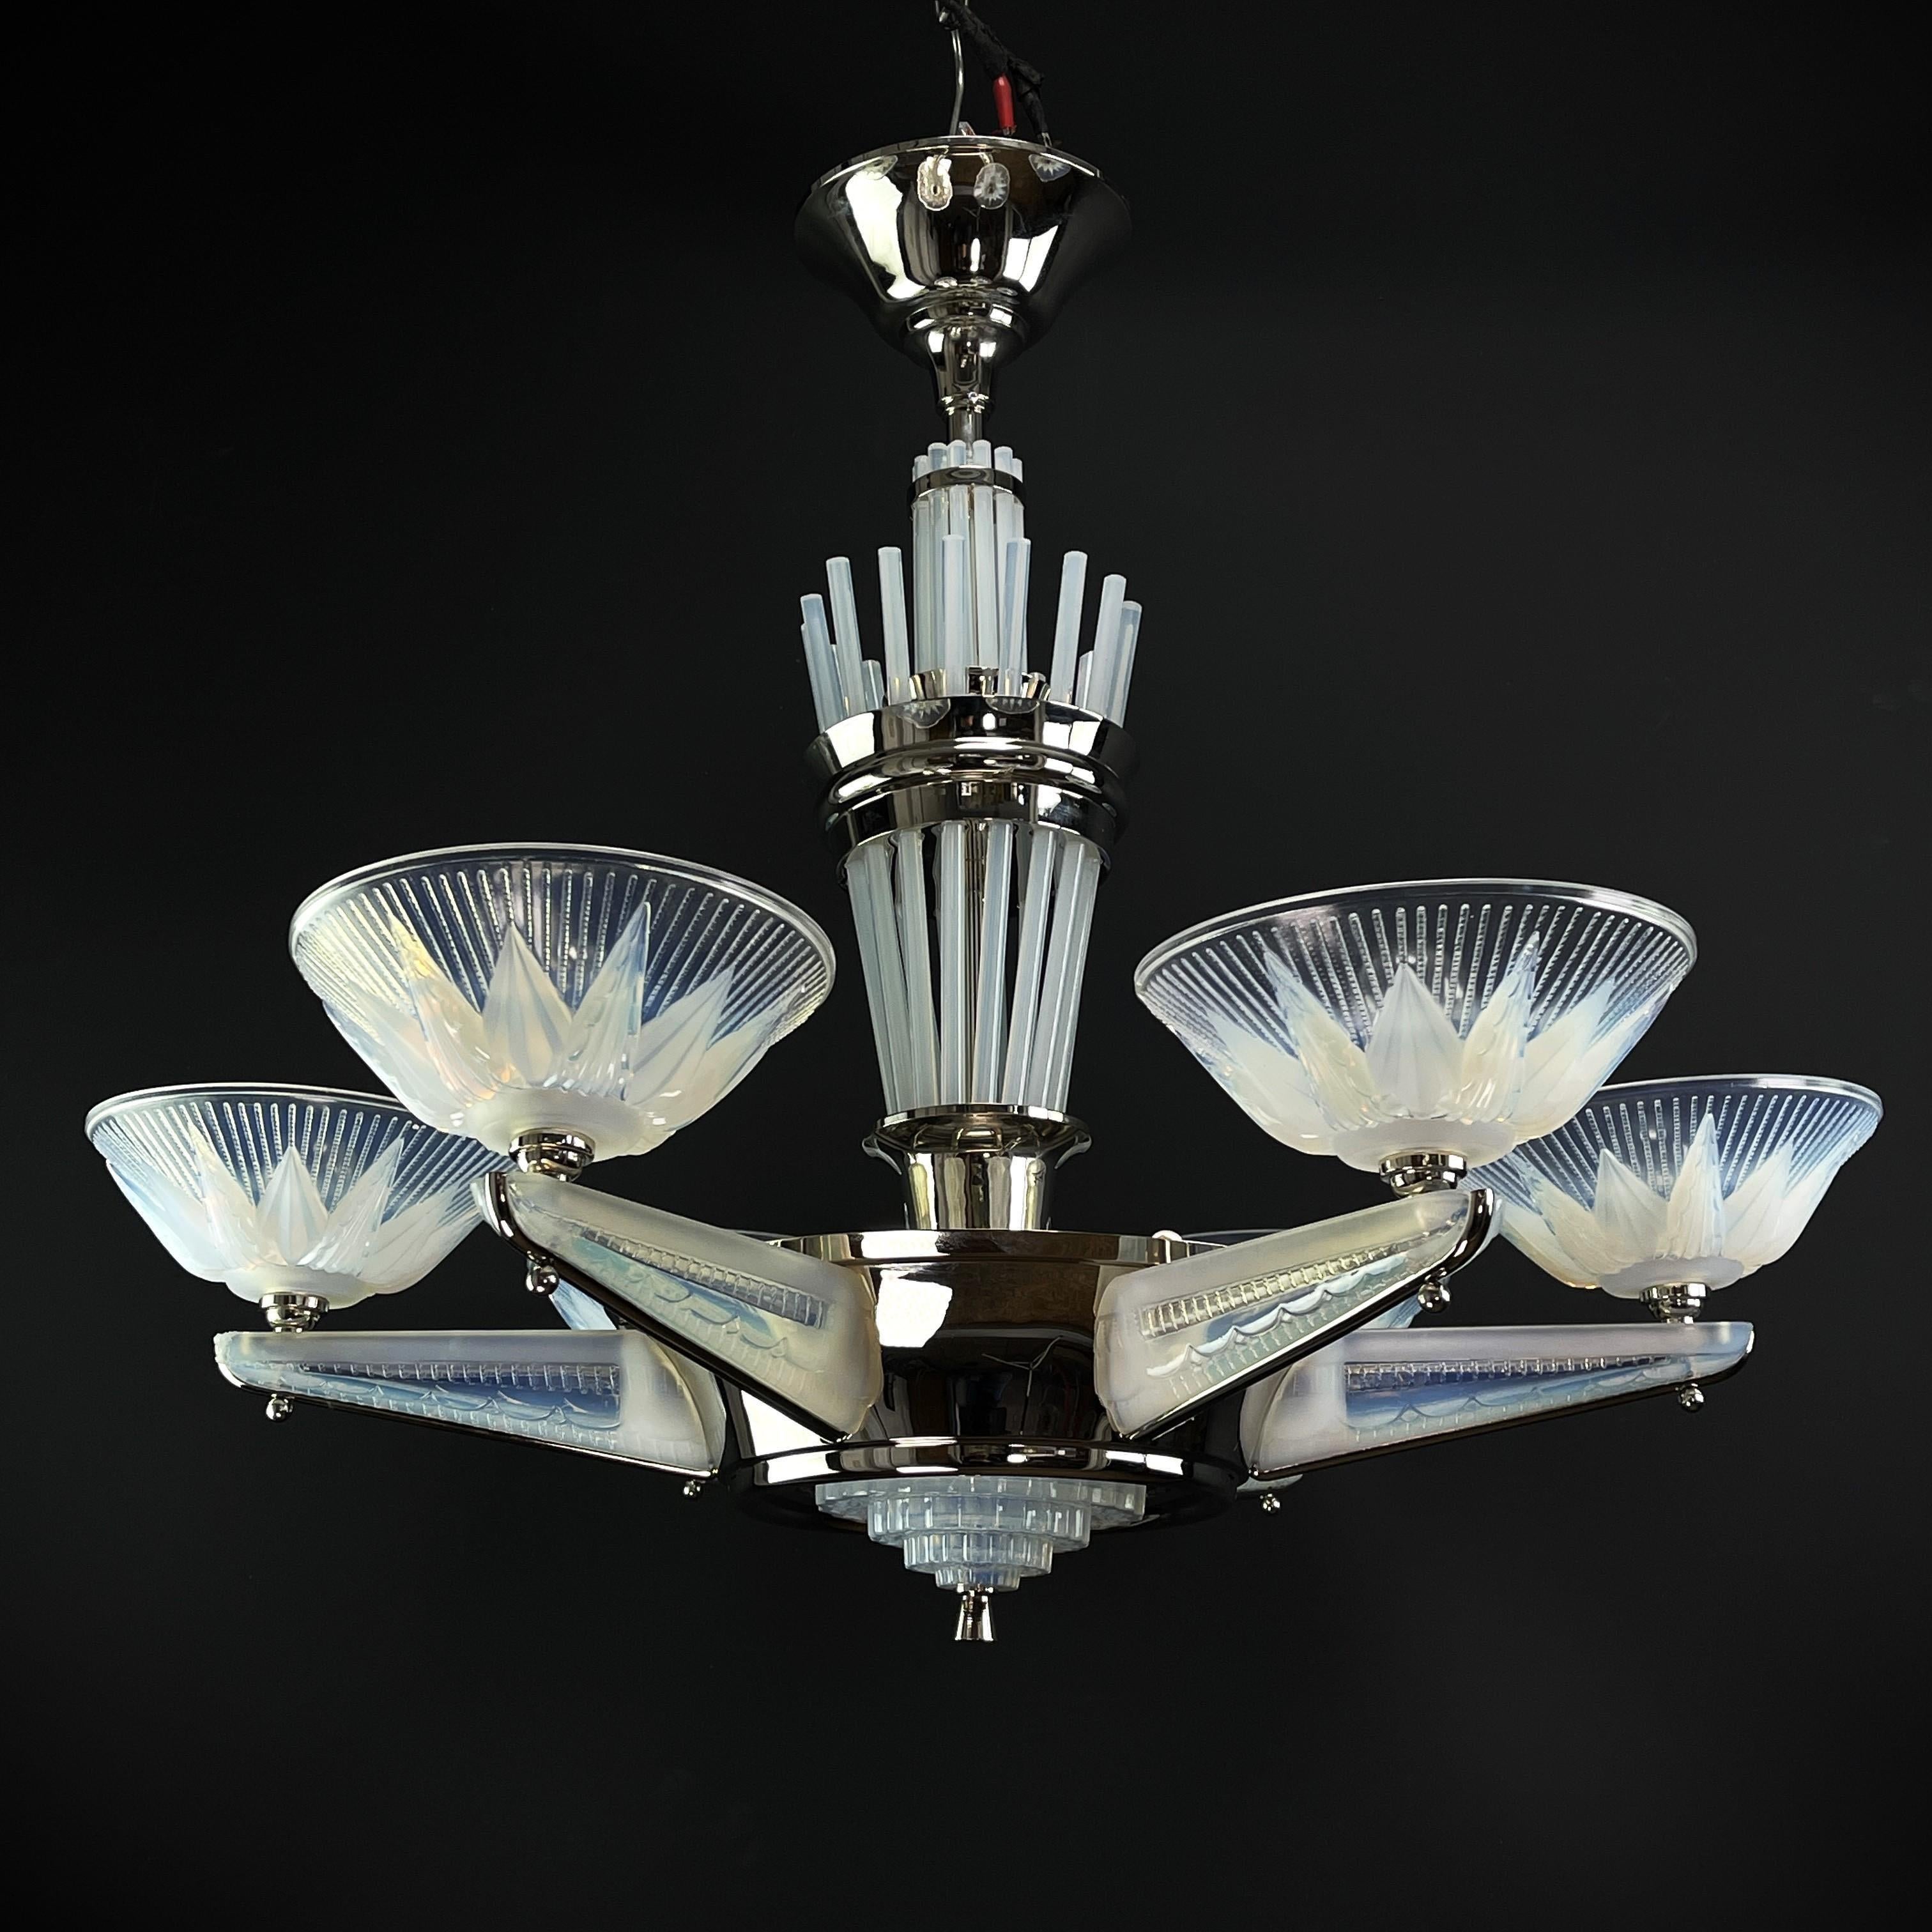 Art Deco chandelier - Pretitot and EZAN - 1930s

The ART DECO ceiling lamp is a remarkable example of the craftsmanship and style of the early 20th century. 

This exclusive masterpiece from the Petitot studio combines high-quality cut glass and